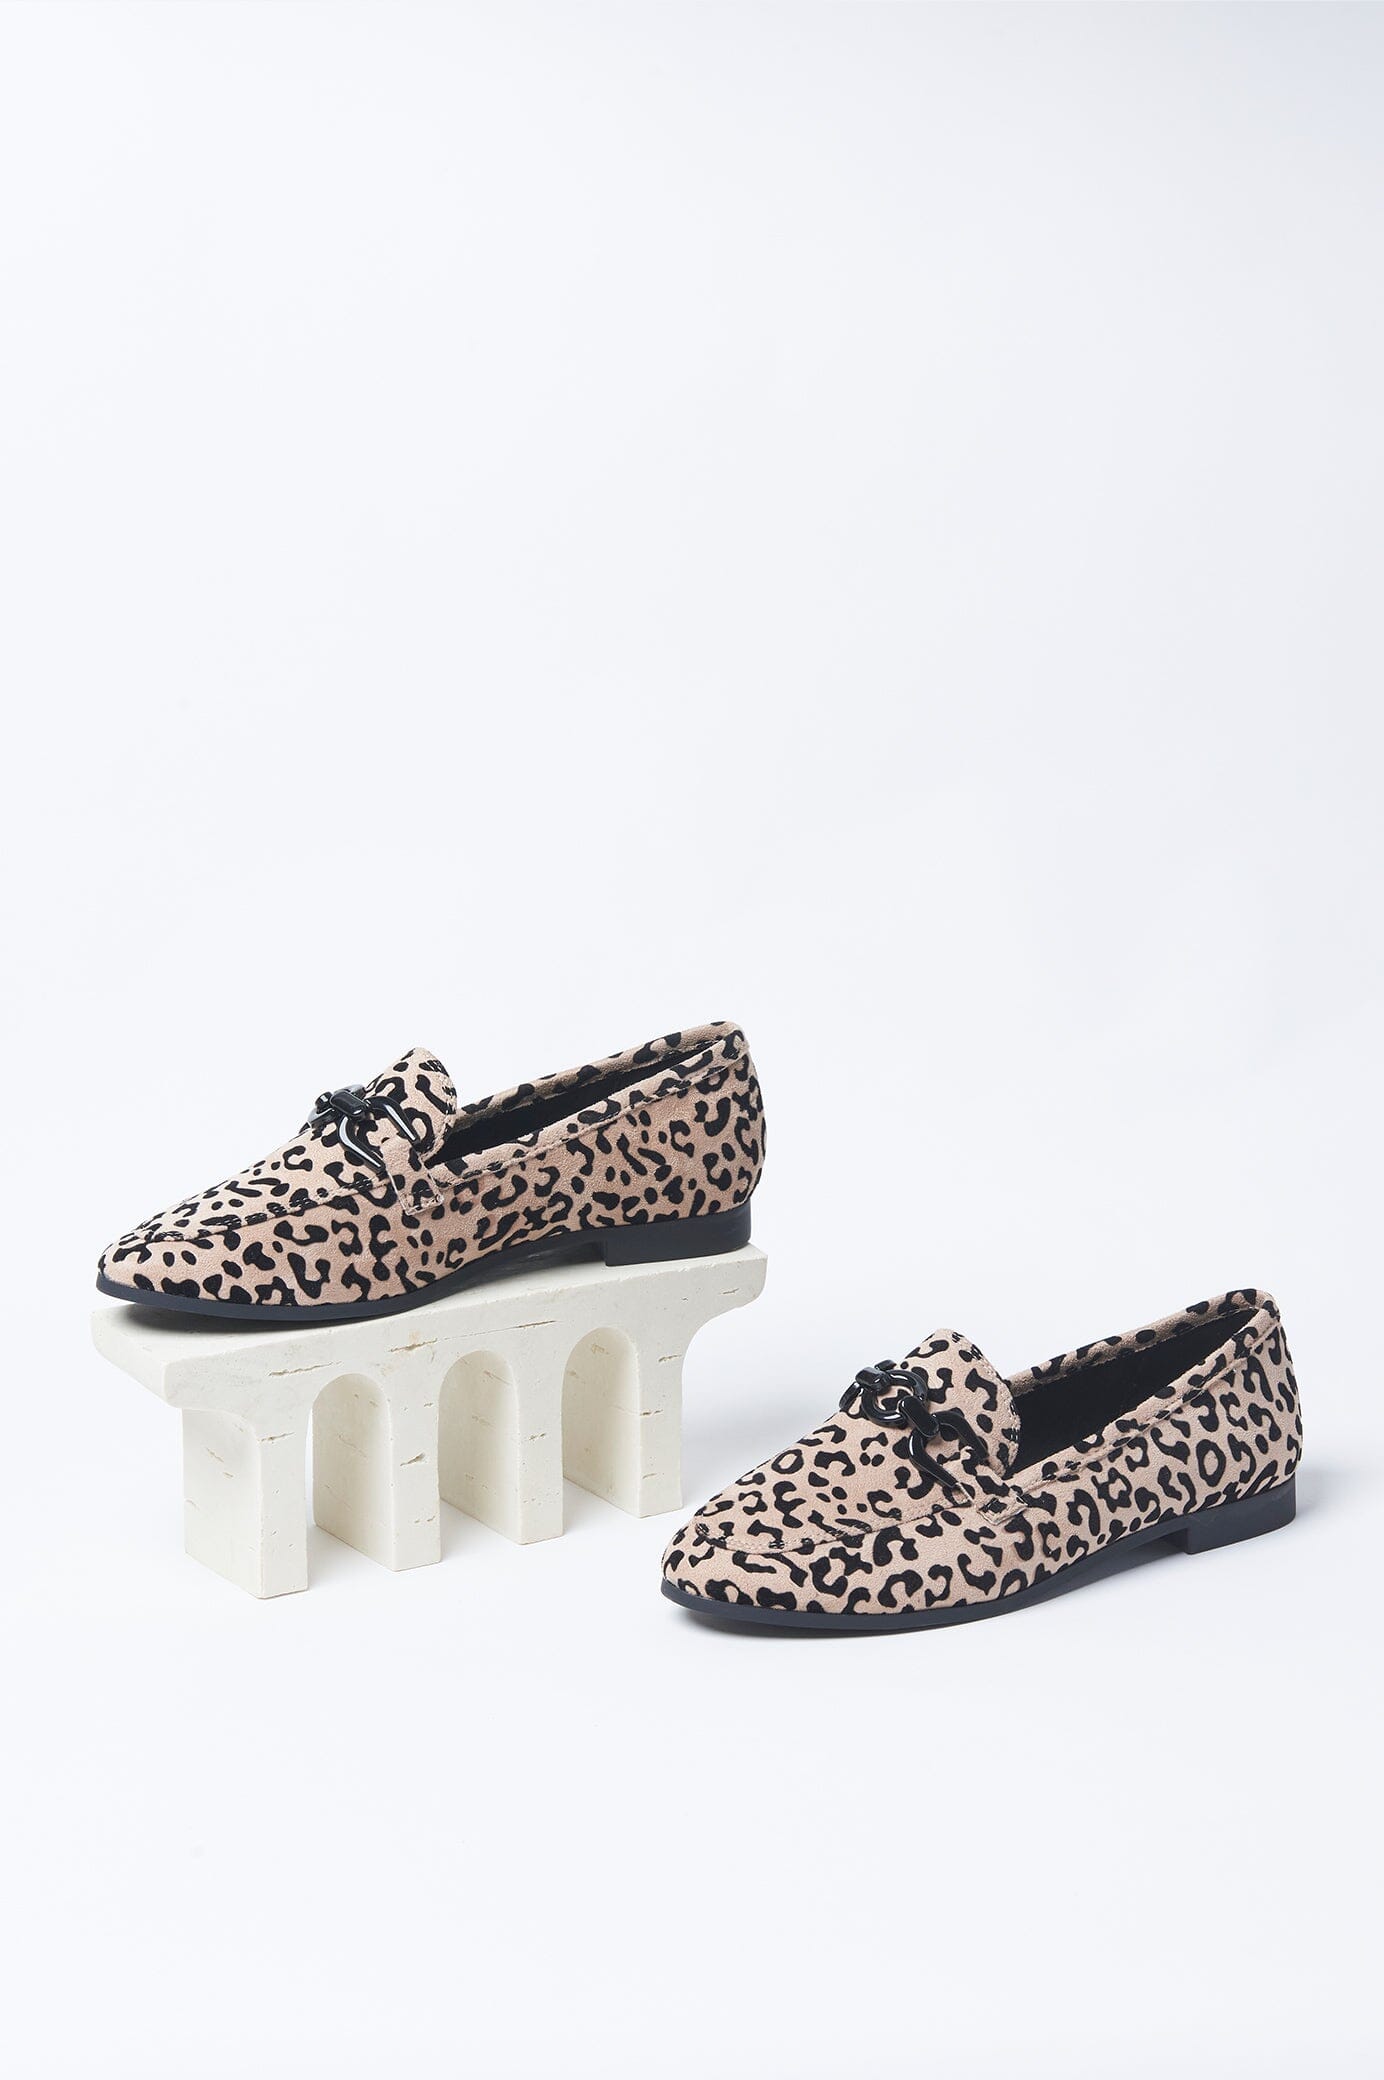 Virginia Loafers Animal Print Shoes